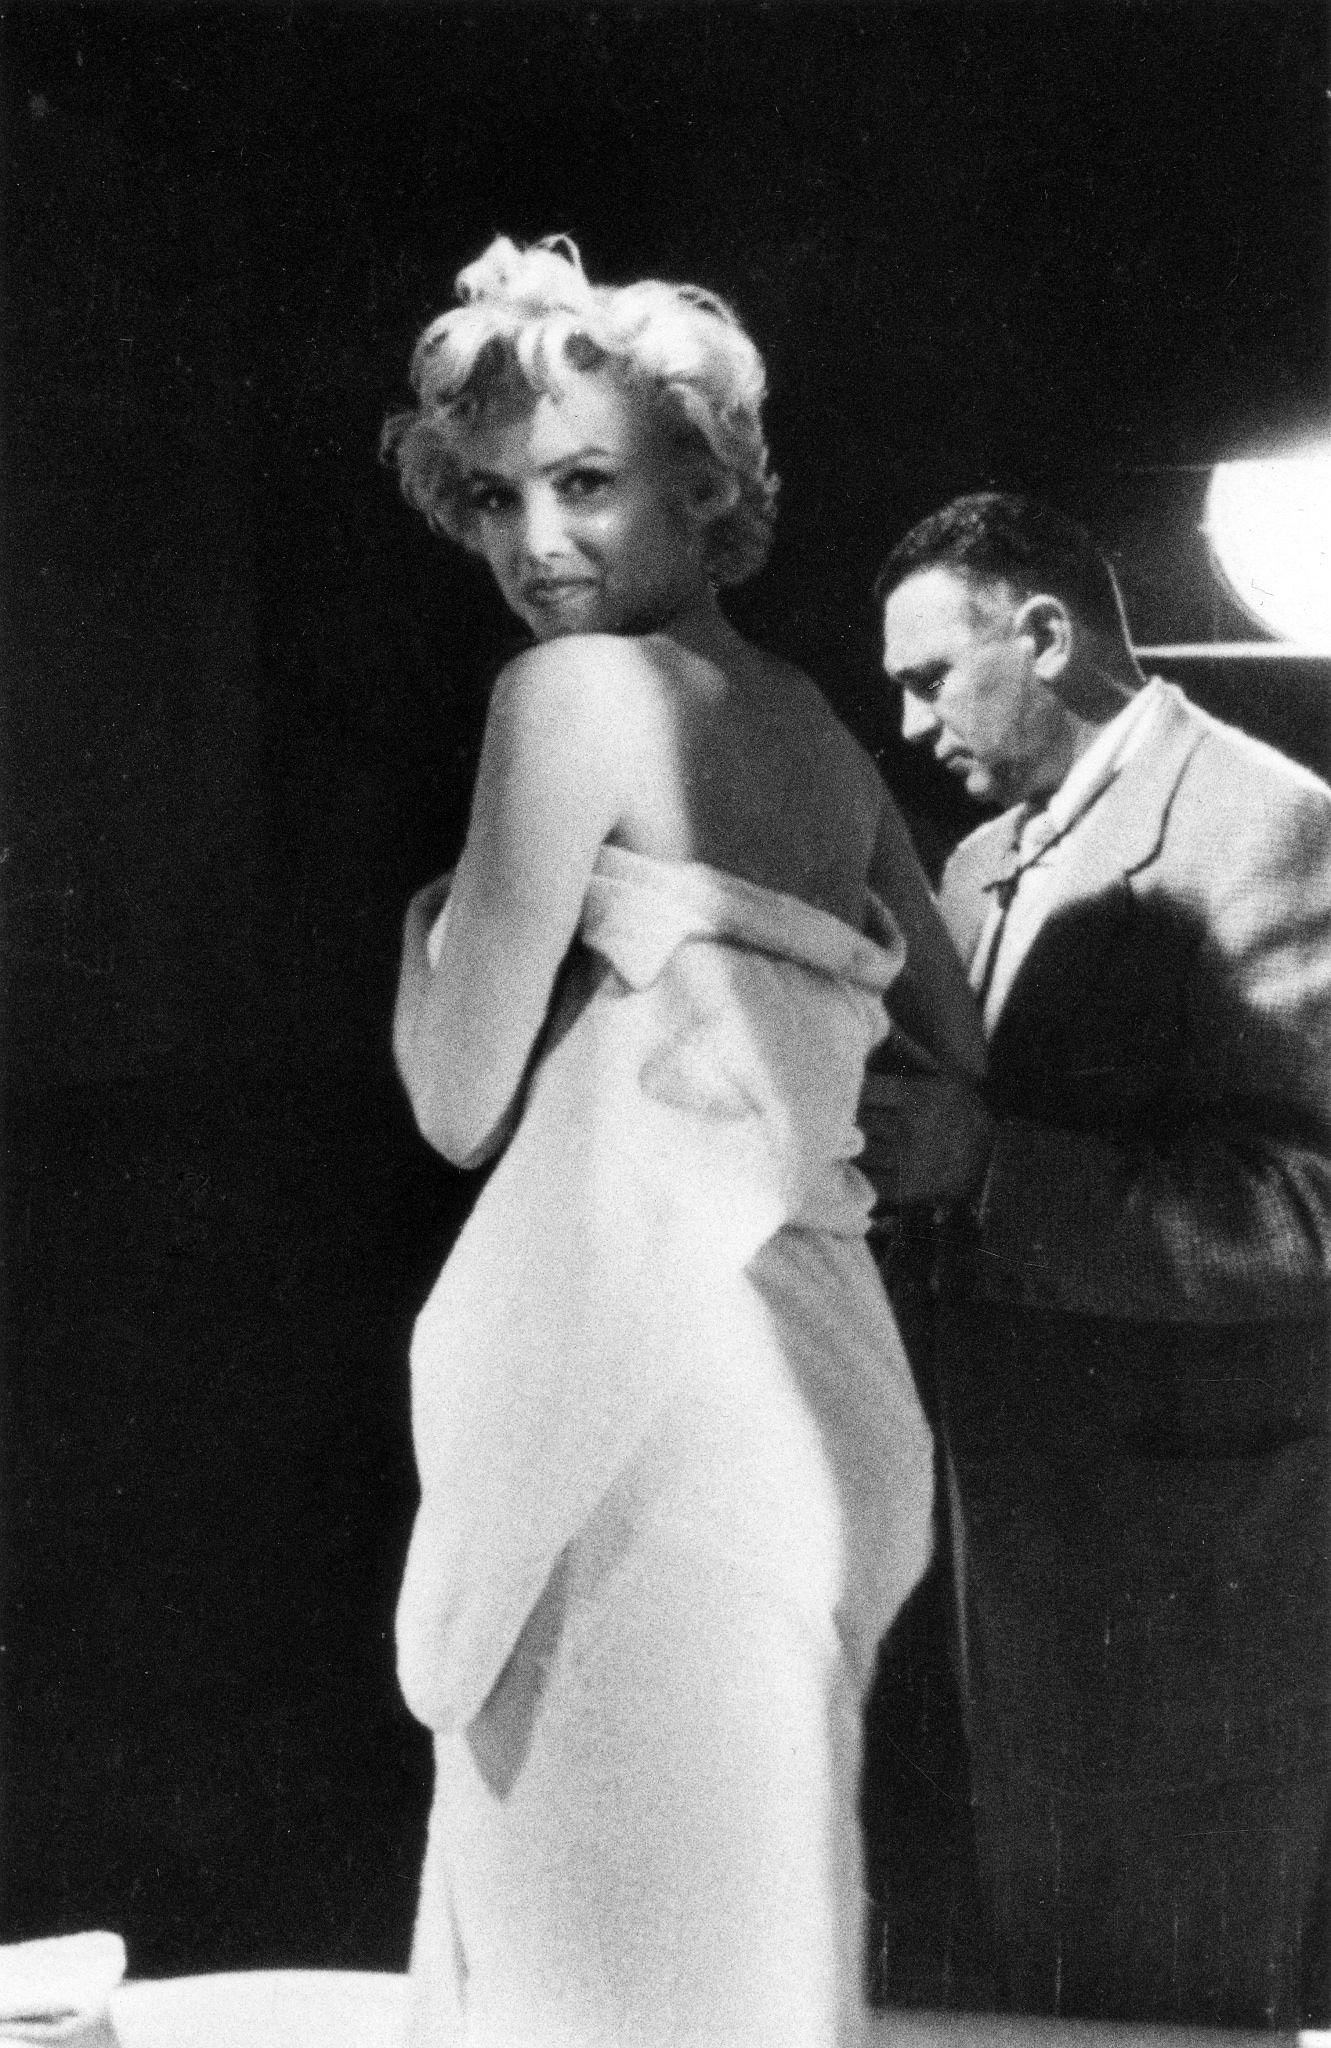 Marilyn Monroe prepares for a bathtub scene in 1954 on set with cinematographer Milton Krasner during the filming of "The Seven Year Itch" in Los Angeles